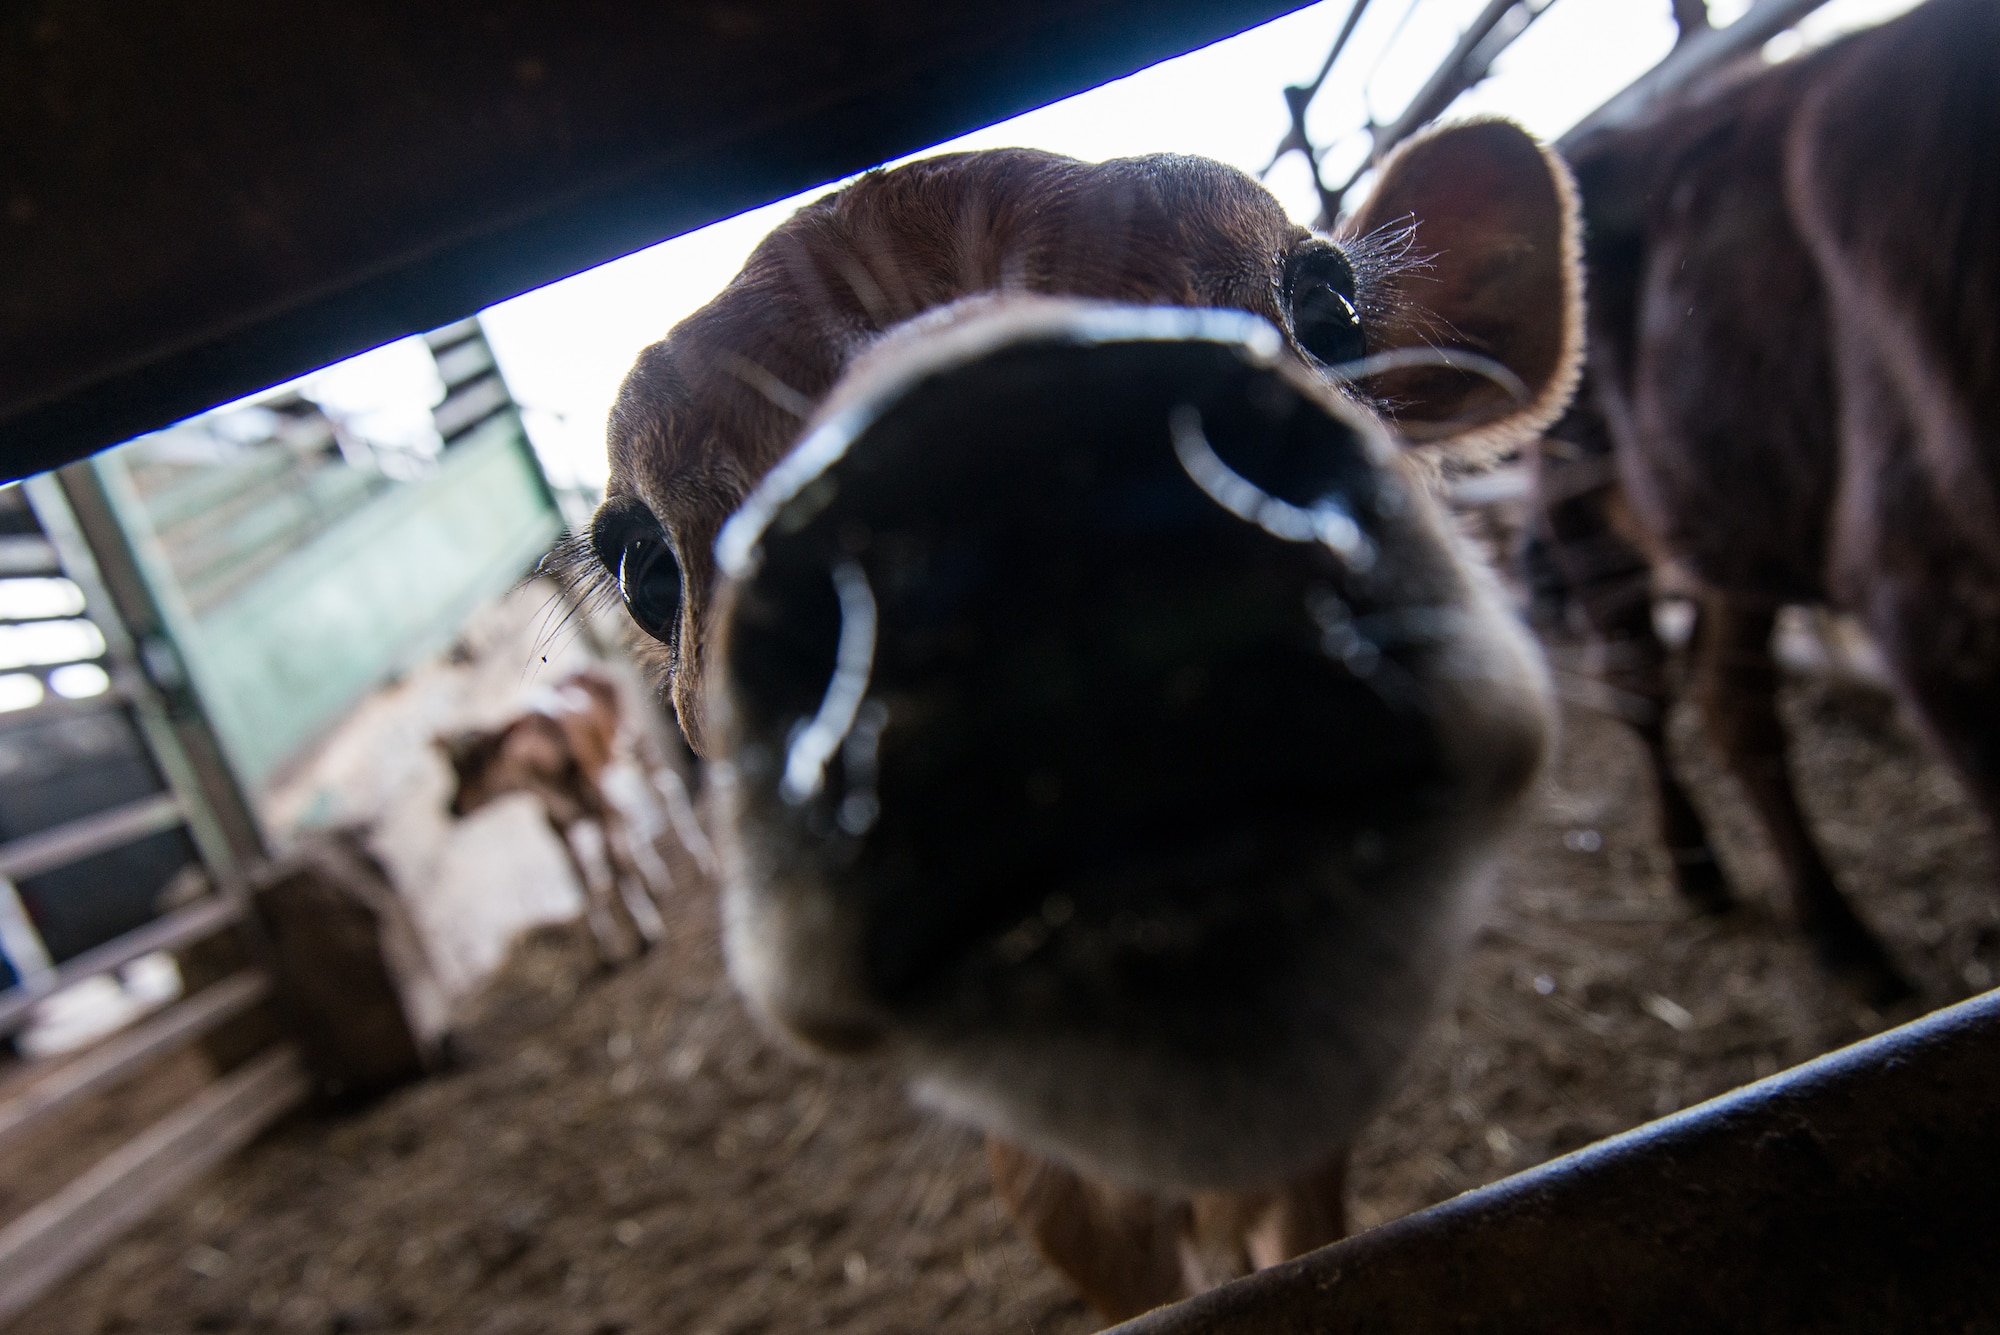 A heifer calf sticks its nose through a gate at SEMO Livestock Sales in Jackson, Mo., June 18, 2019. Airmen deployed in support of Delta Area Economic Opportunity Corporation Tri-State Innovative Readiness Training 2019 coordinated with civilian public health agency partners to view livestock processes and promote interagency cooperation. (U.S. Air National Guard photo by Senior Airman Jonathan W. Padish)